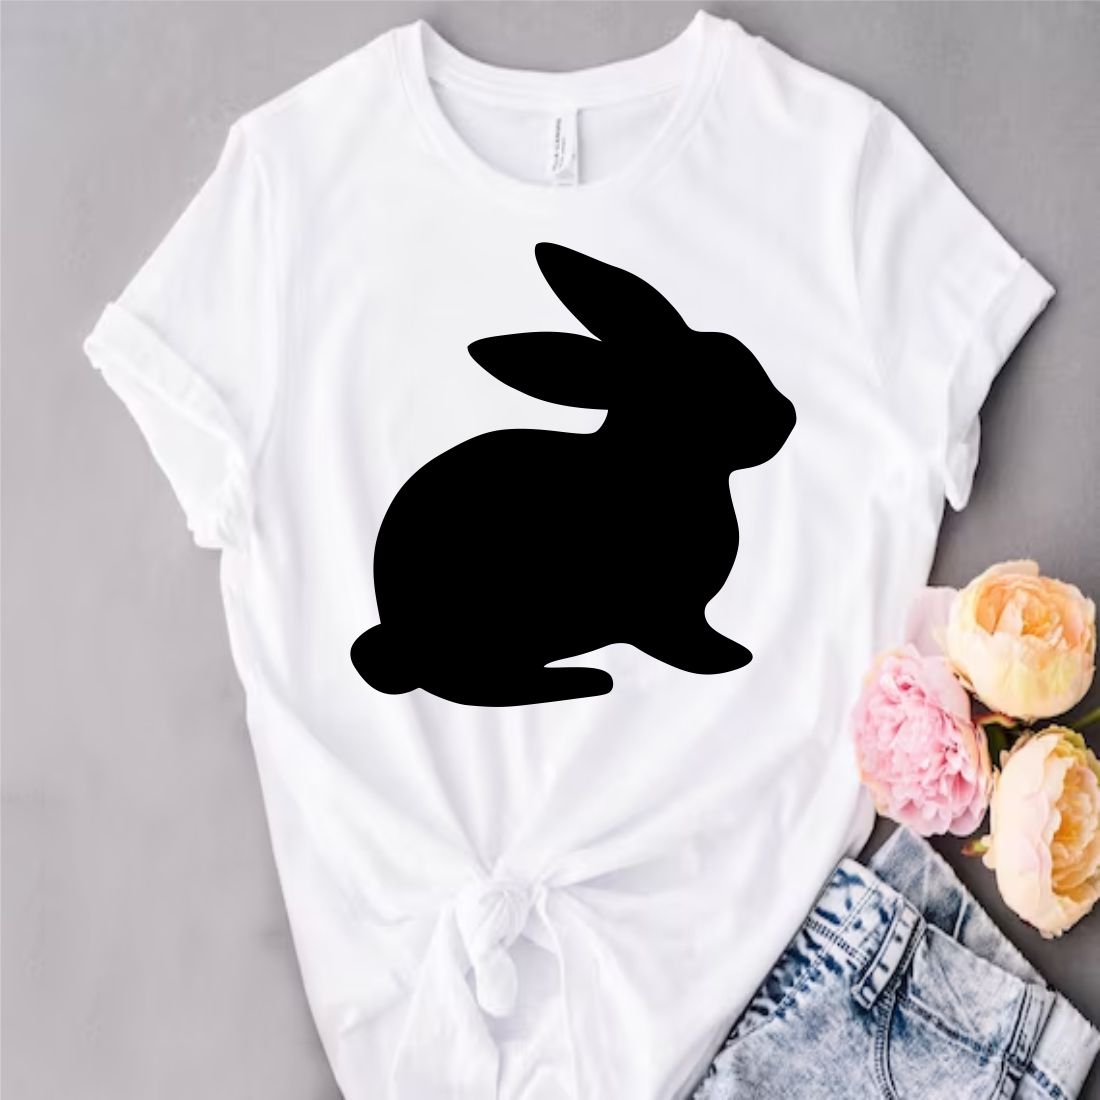 Easter Bunny SVG, Rabbit, Bunny Svg, Vector Cut file Cricut, Silhouette , PDF, PNG, DXF, EPS - Only $3 preview image.